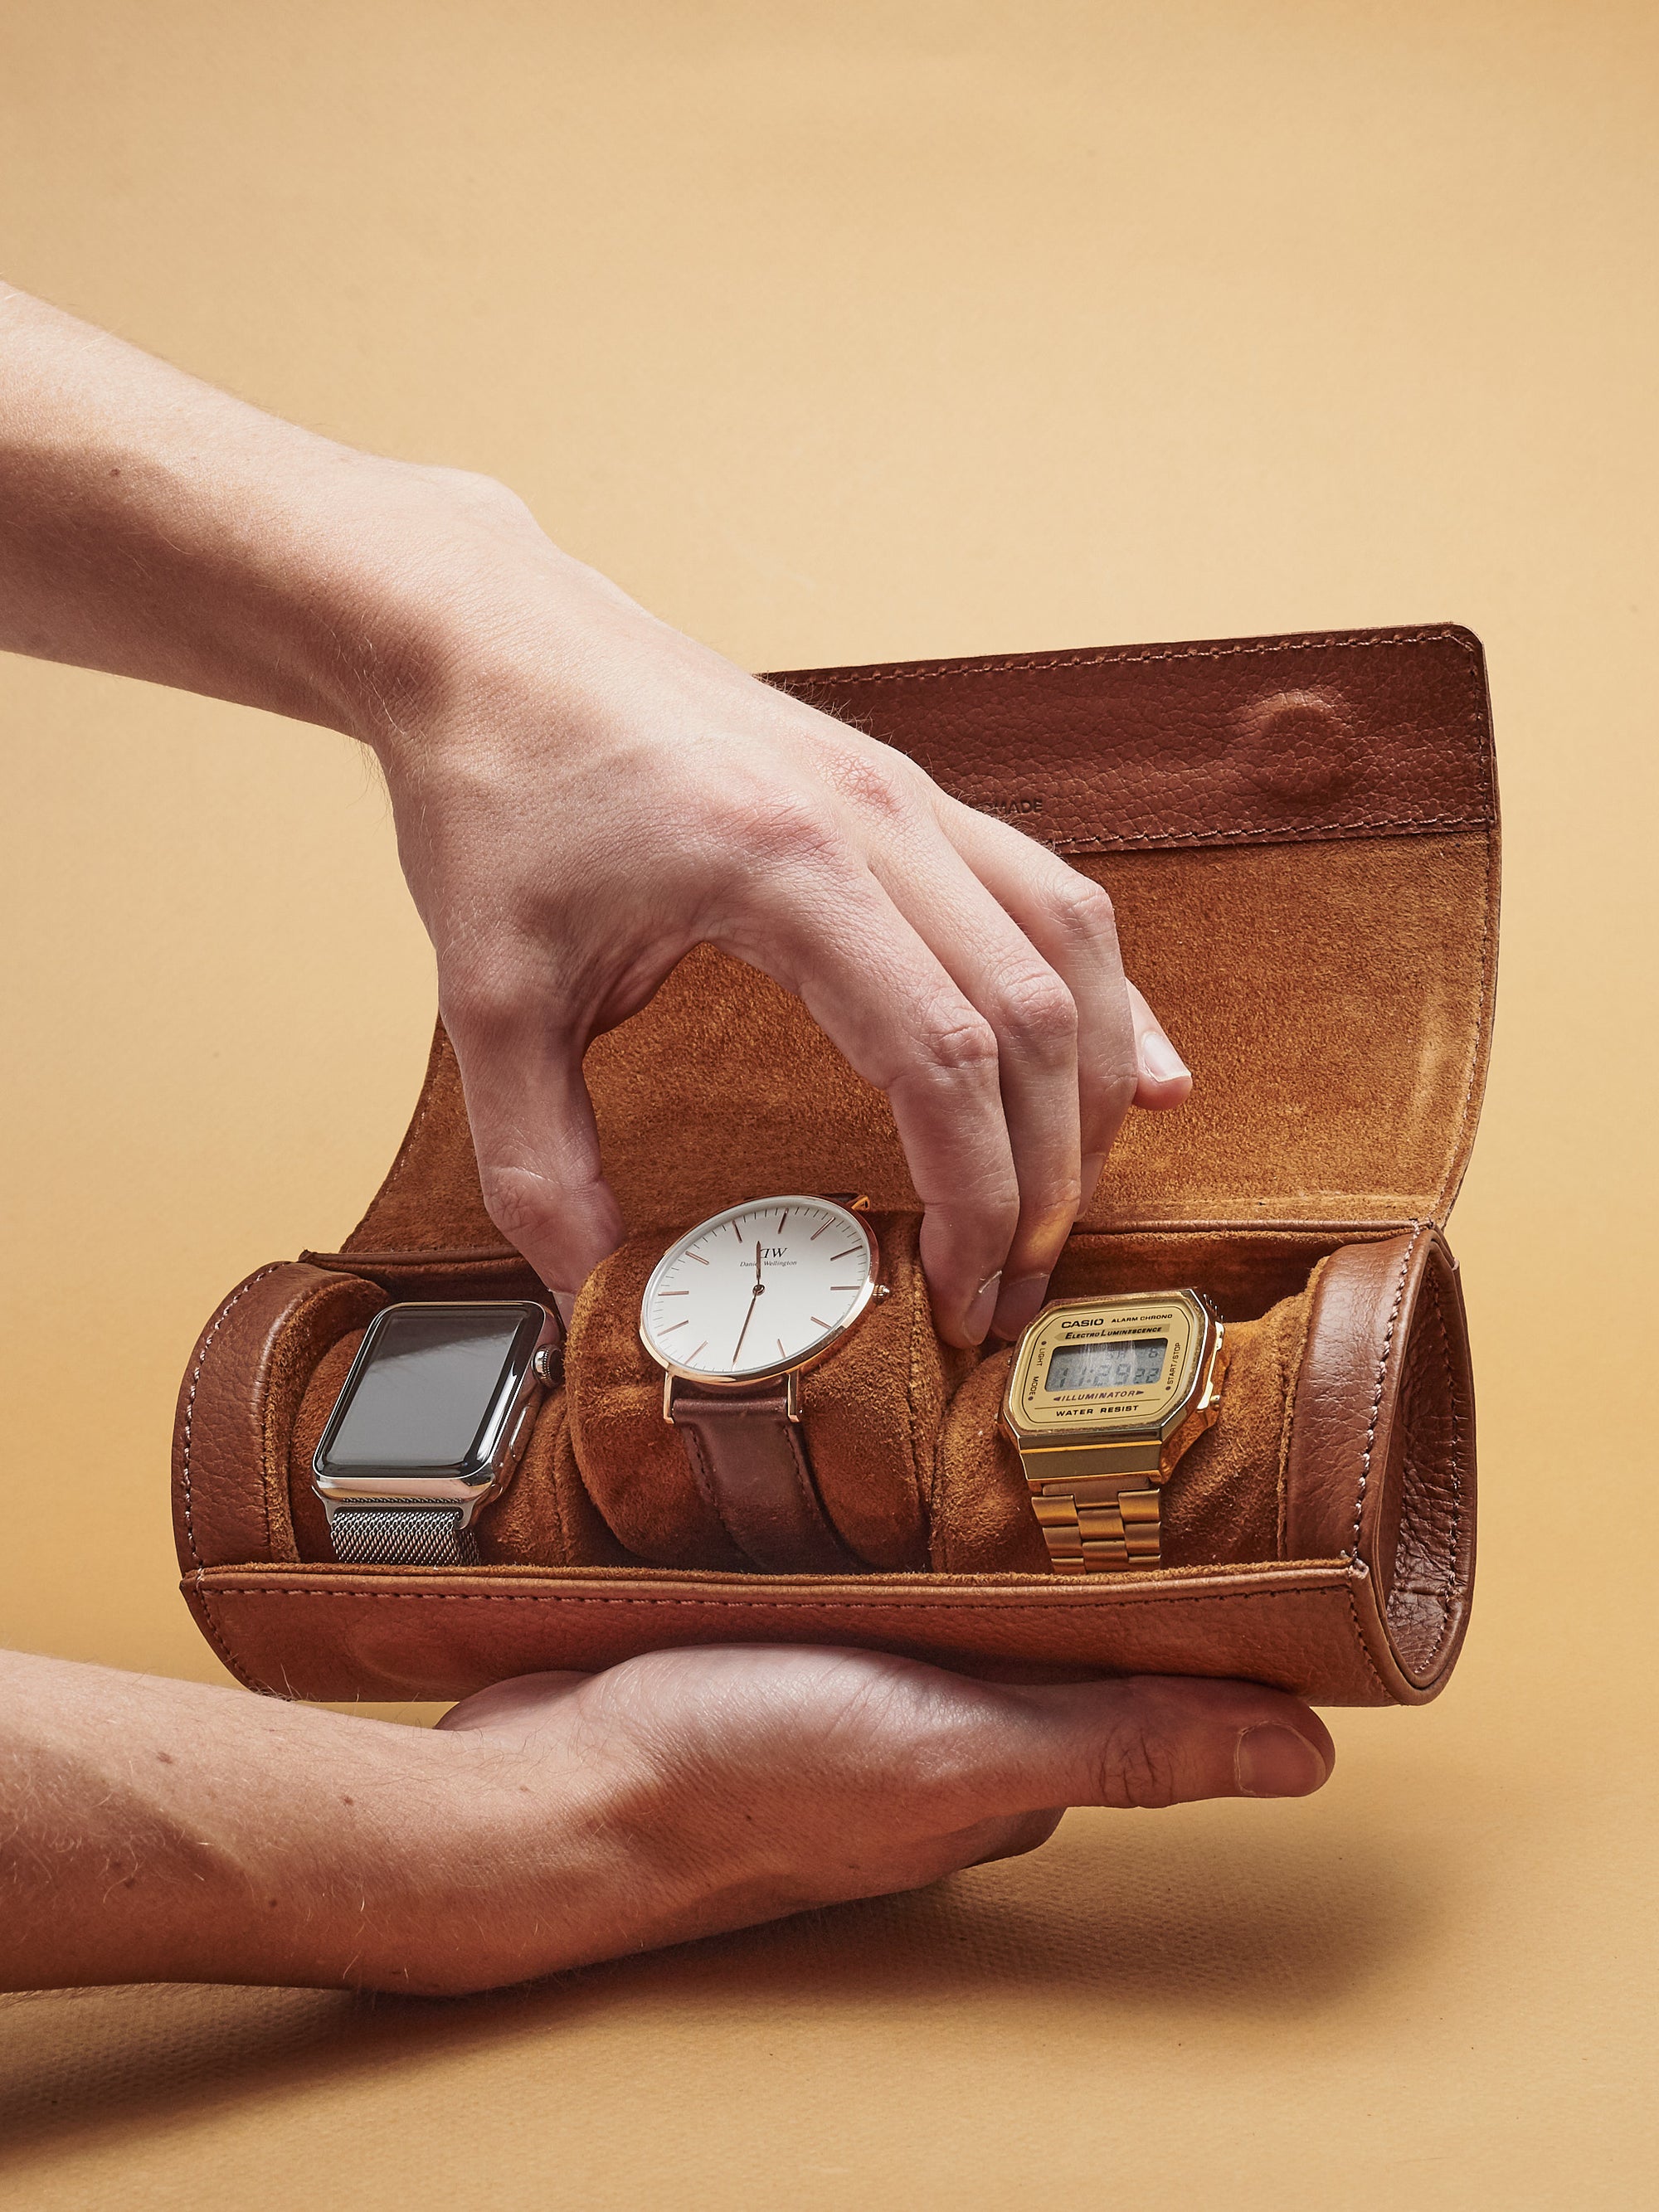 Leather Travel Watch Cases & Watch Rolls by Capra - Capra Leather